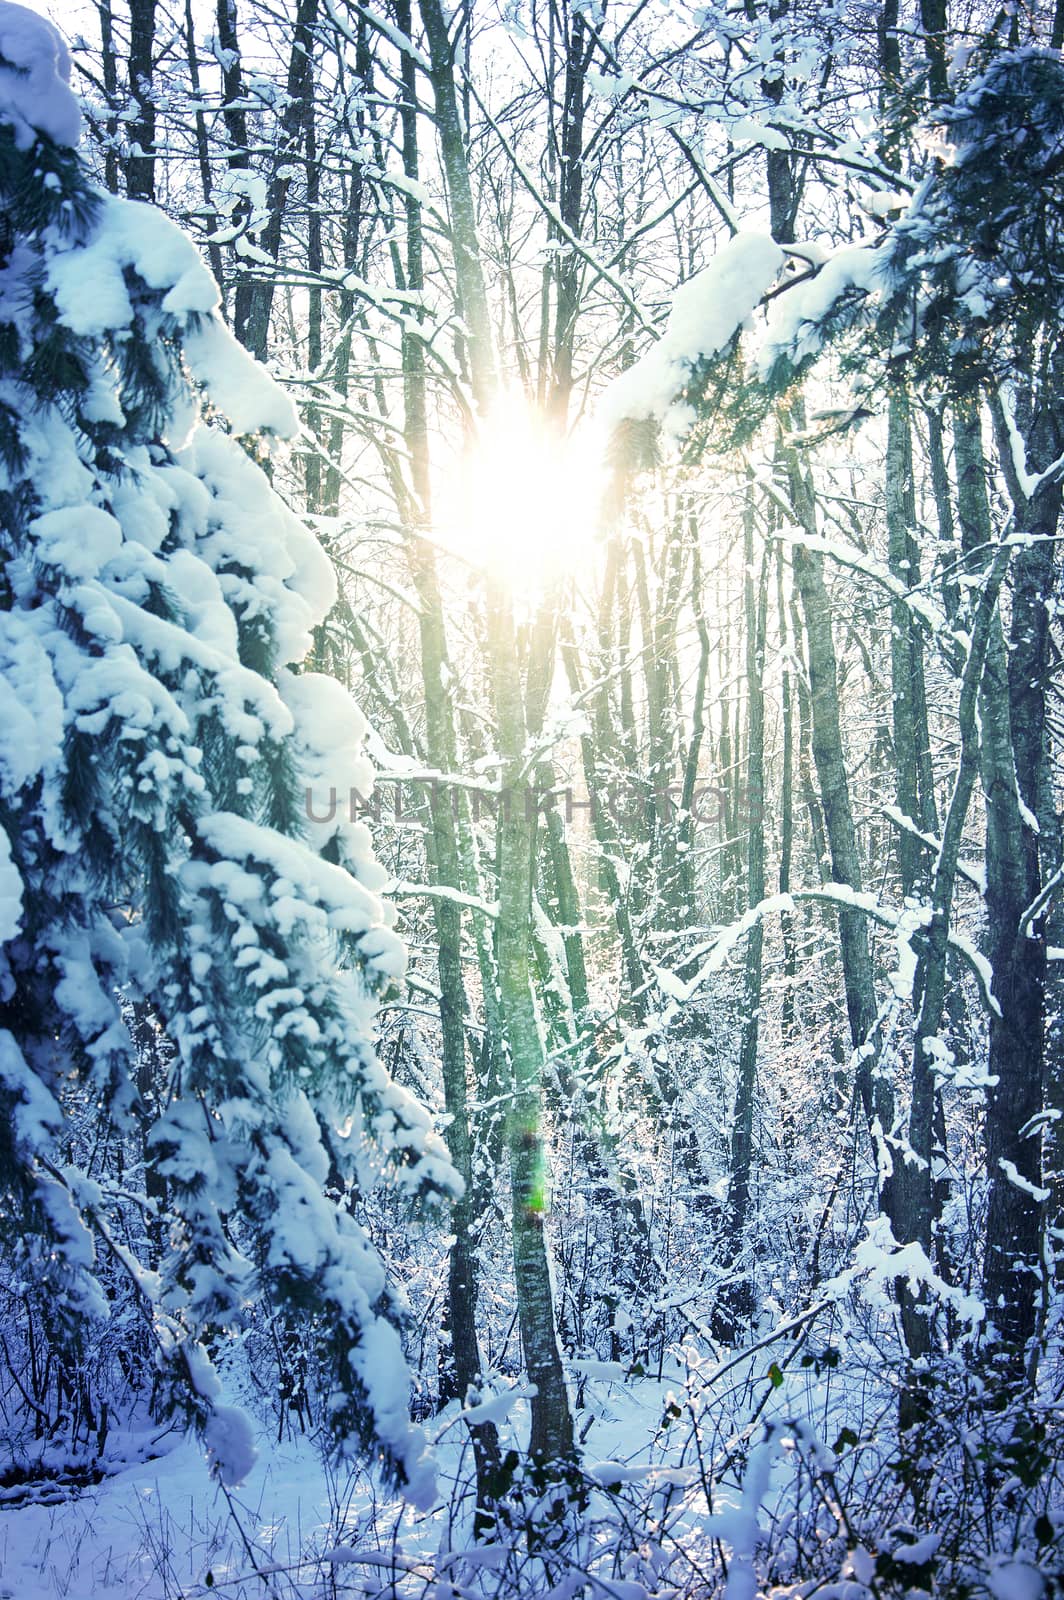 Winter conceptual image. Winter in the forest. Trees covered with snow.